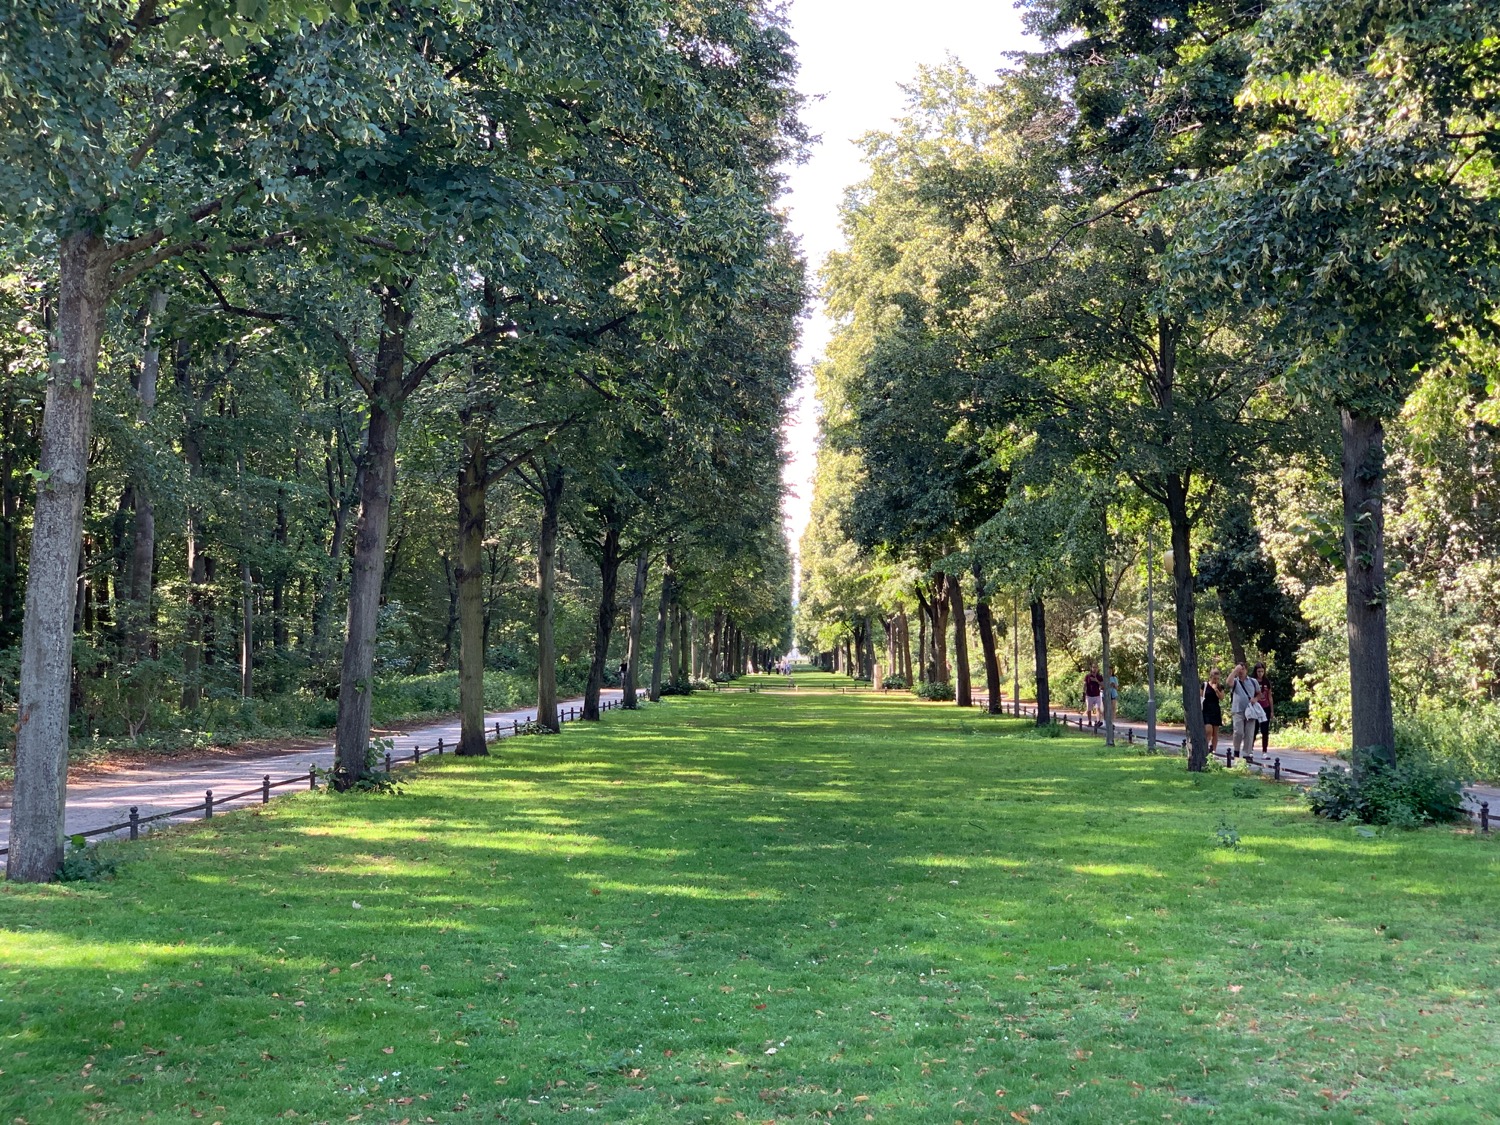 a path with trees and people walking